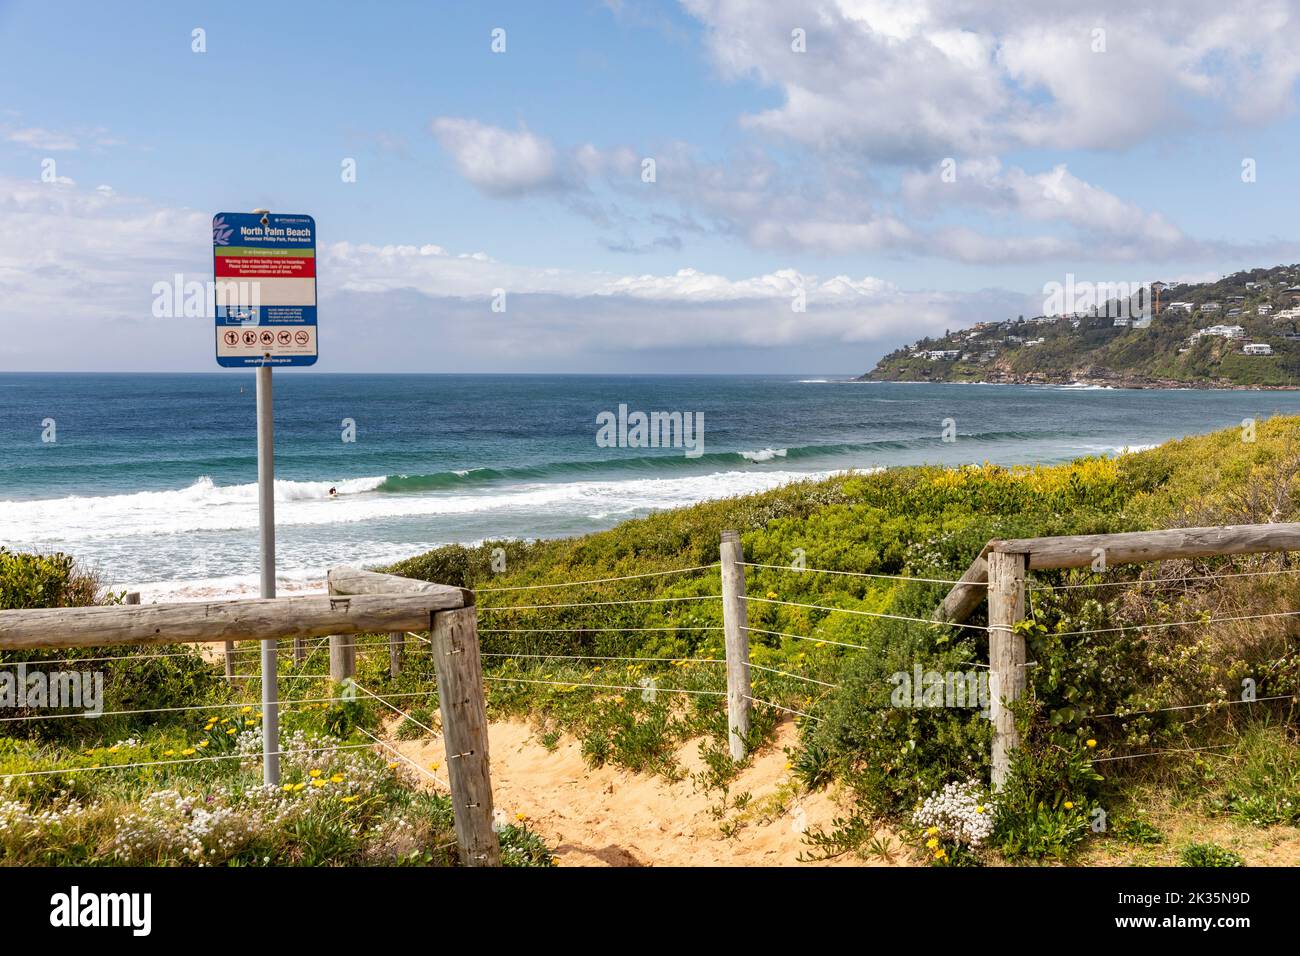 North Palm Beach in Sydney, sand walkway through the vegetation down to the beach and ocean,Sydney,NSW,Australia Stock Photo